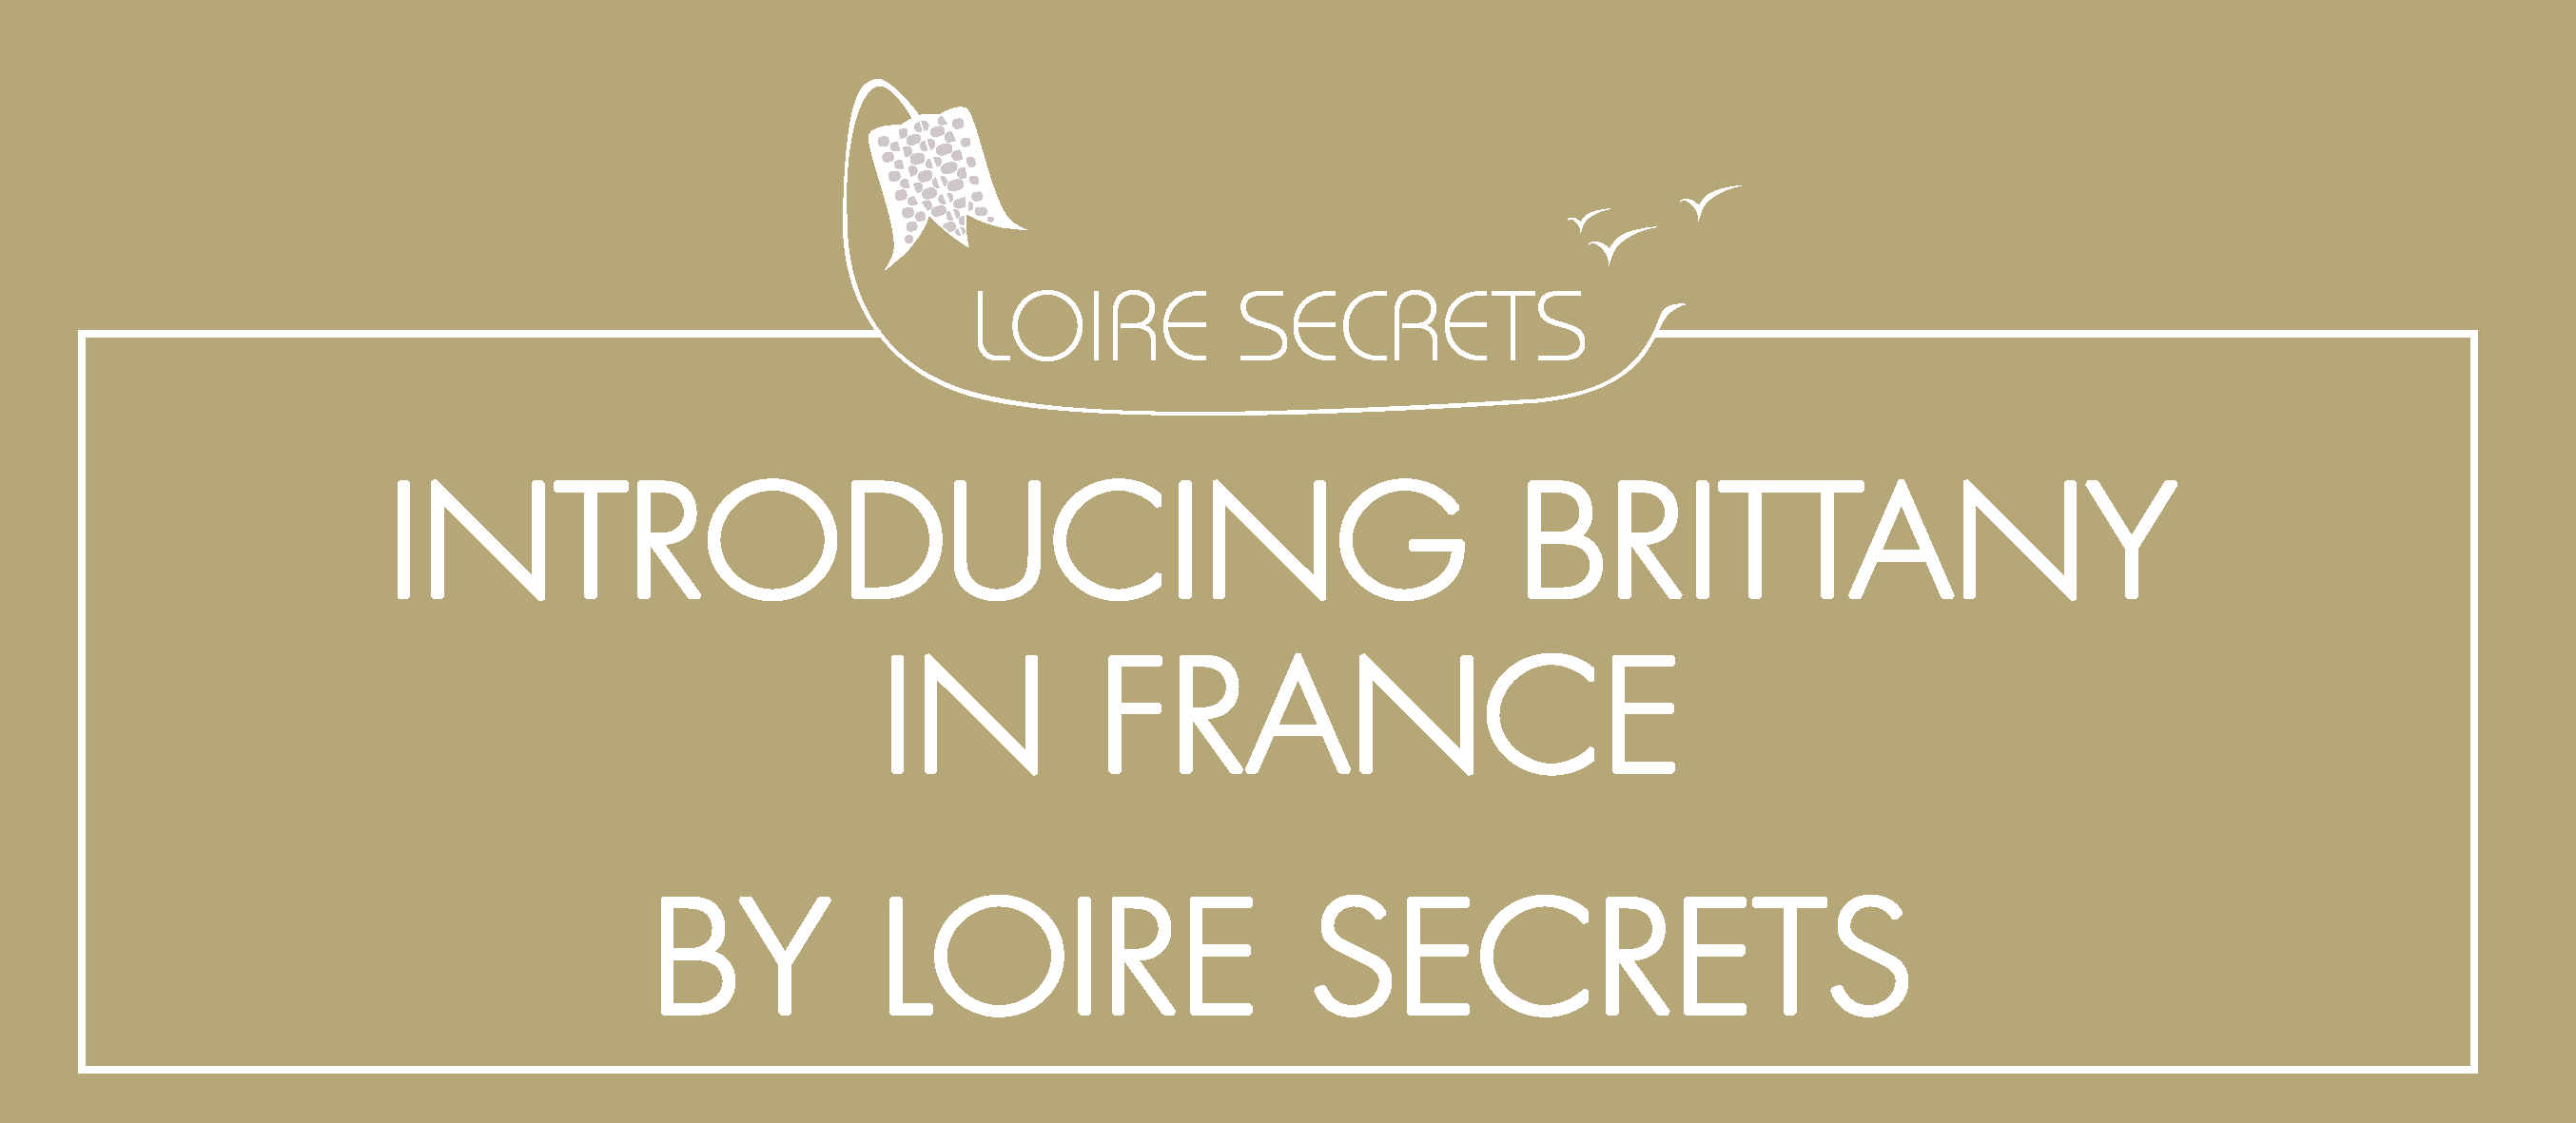 You are currently viewing Introducing Brittany in France, by Loire Secrets